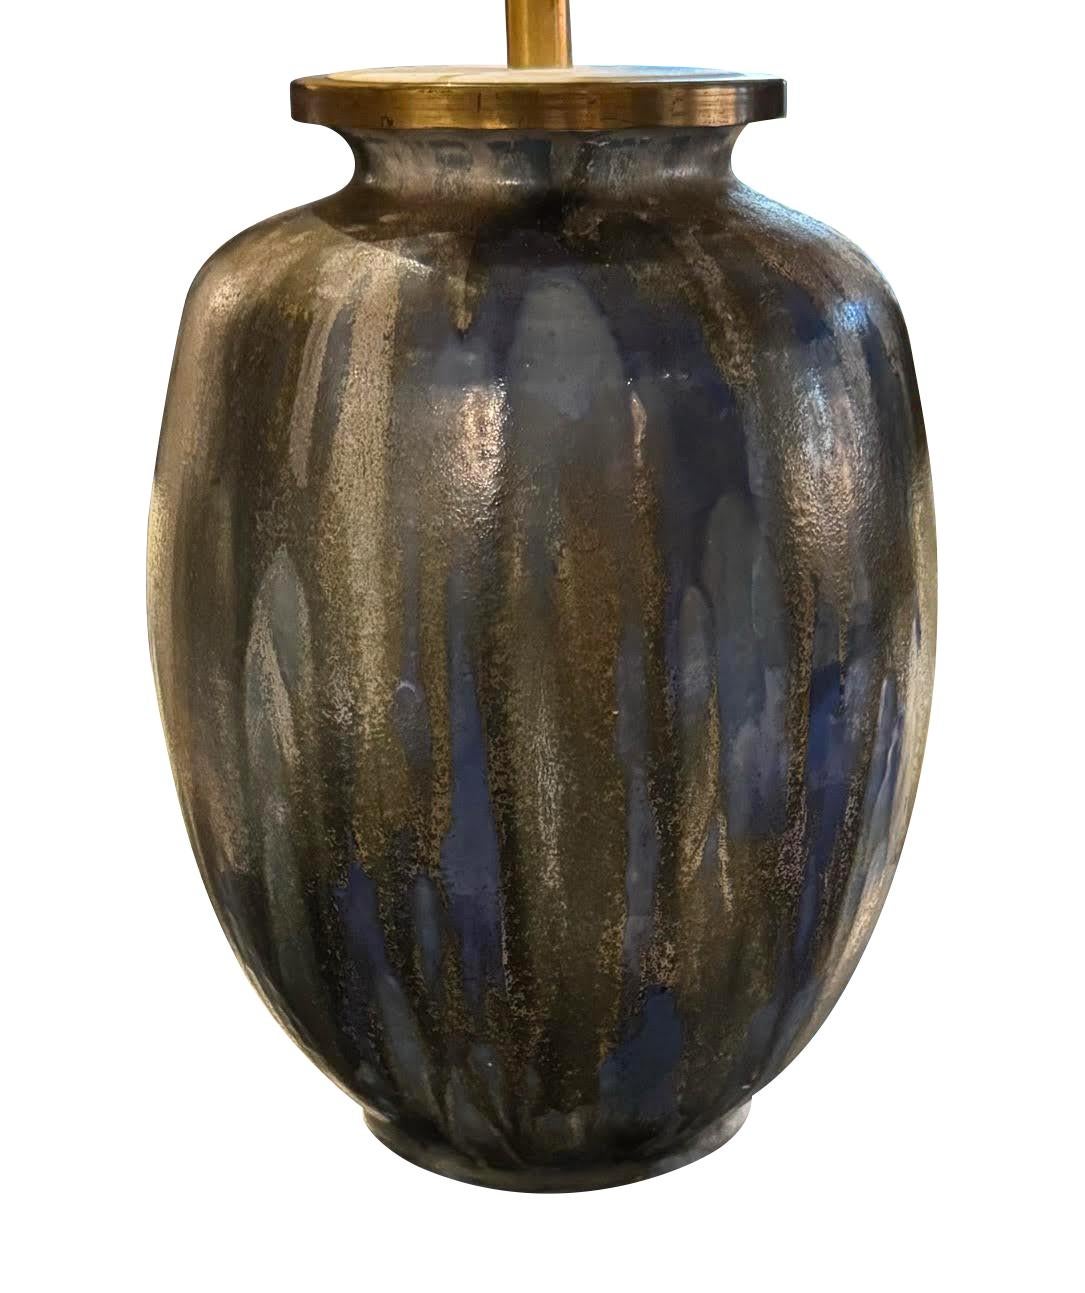 Mid Century Belgian drip glazed single vase.
Shades of charcoal greys and cobalt blue.
New Belgian black linen shade with gold interior.
Base measures 9